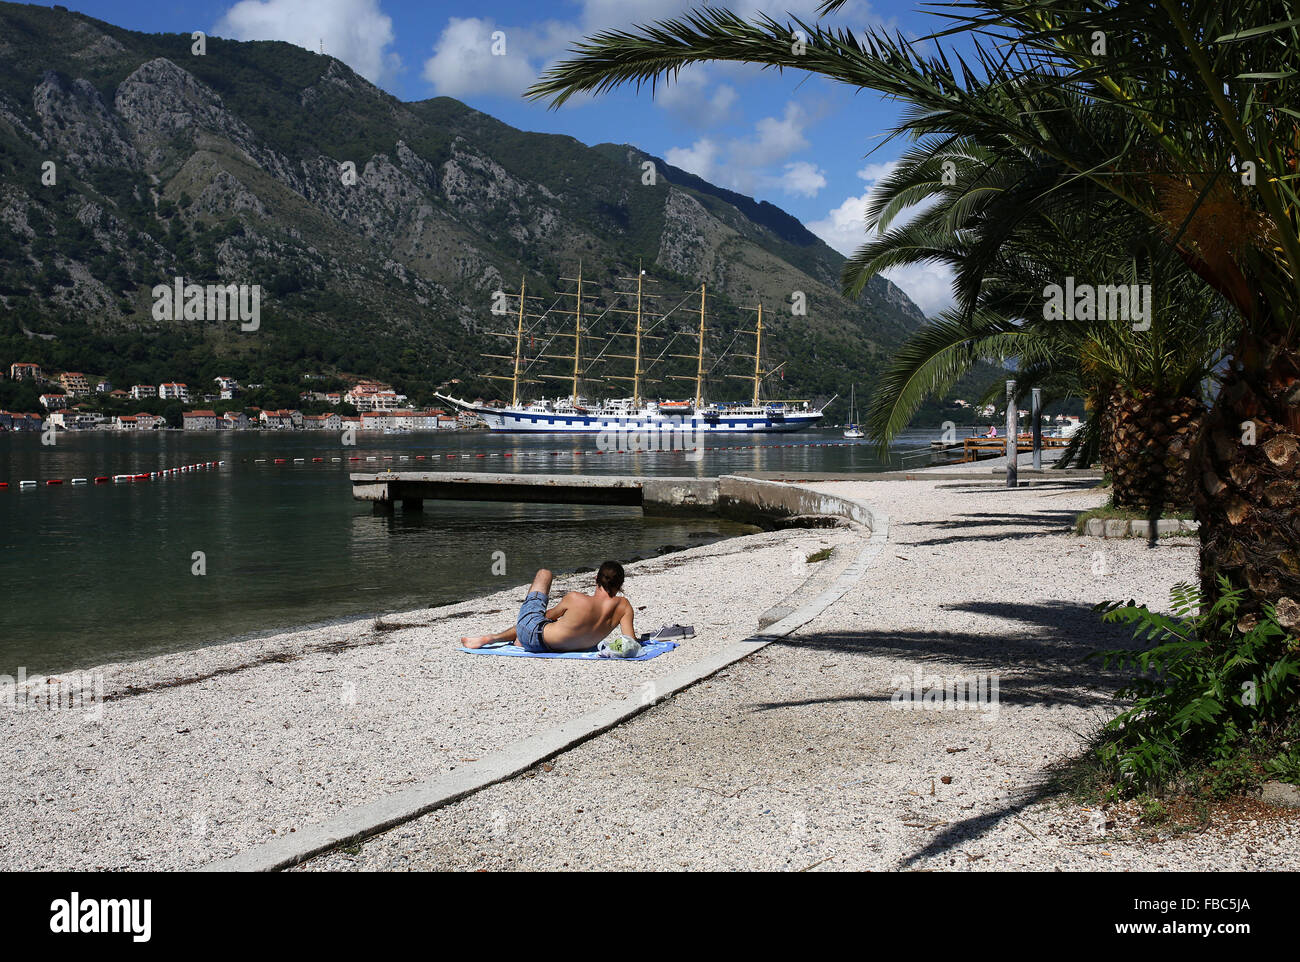 Tall ship seen in the Bay of Kotor, Montenegró Stock Photo